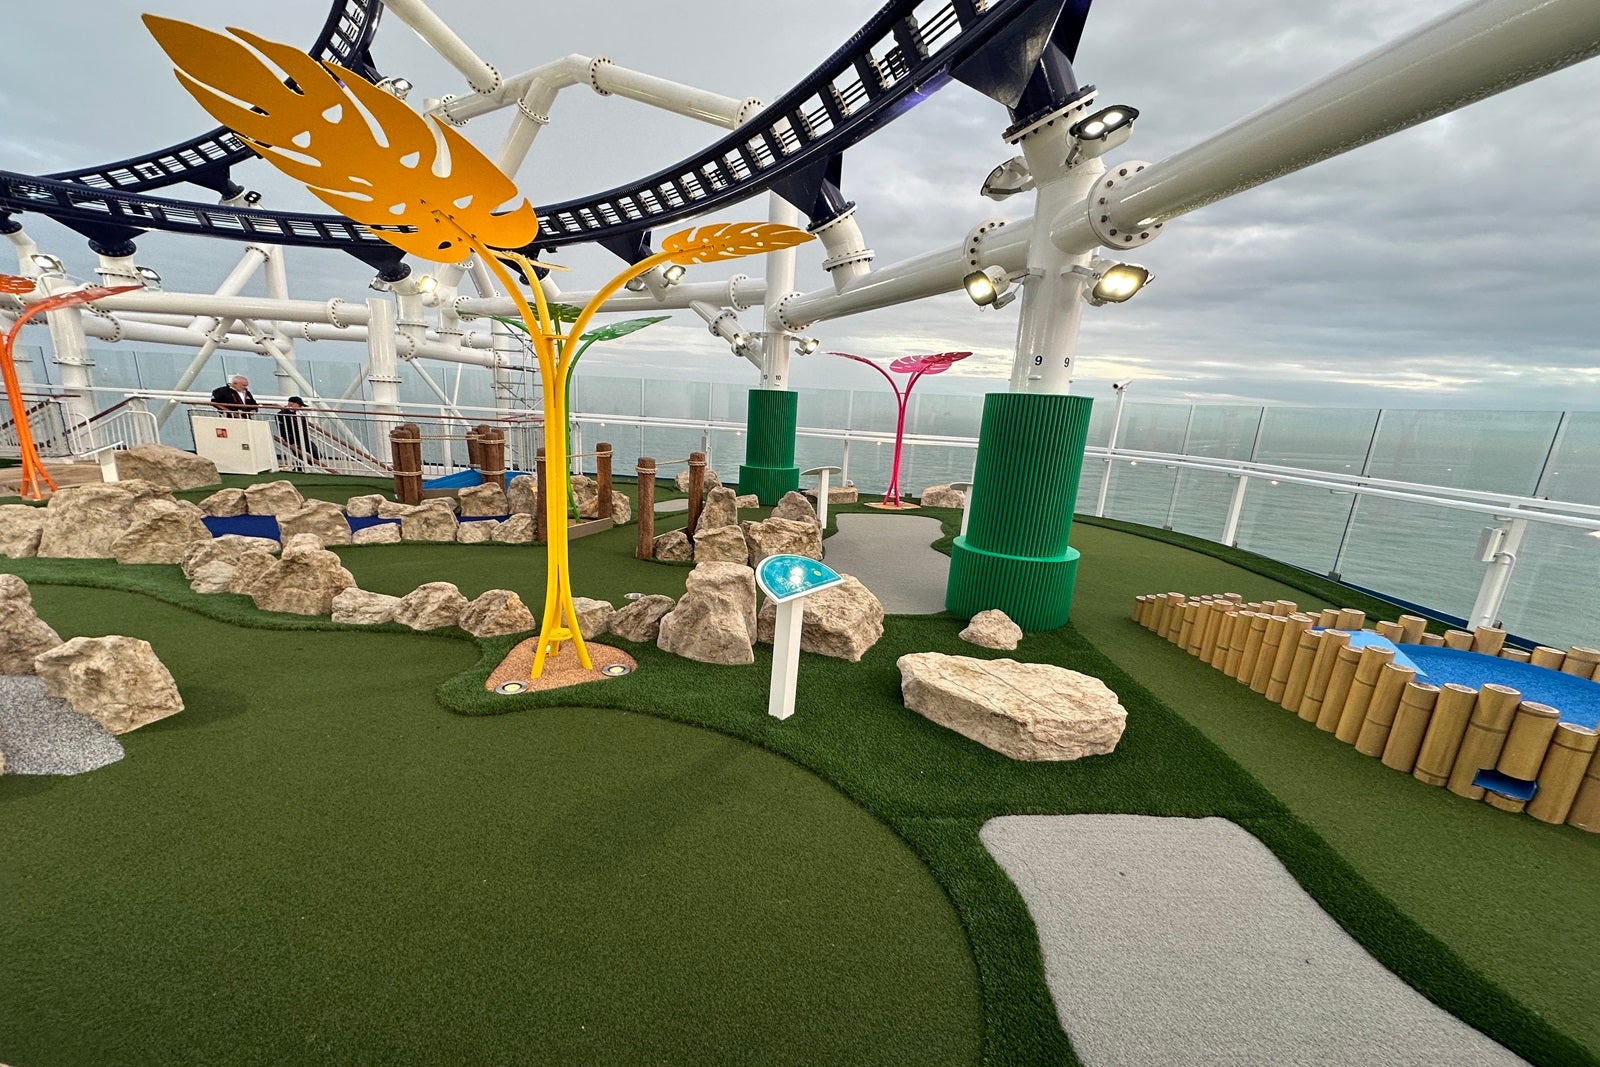 Part of a cruise ship miniature golf course with a portion of roller coaster track overhead